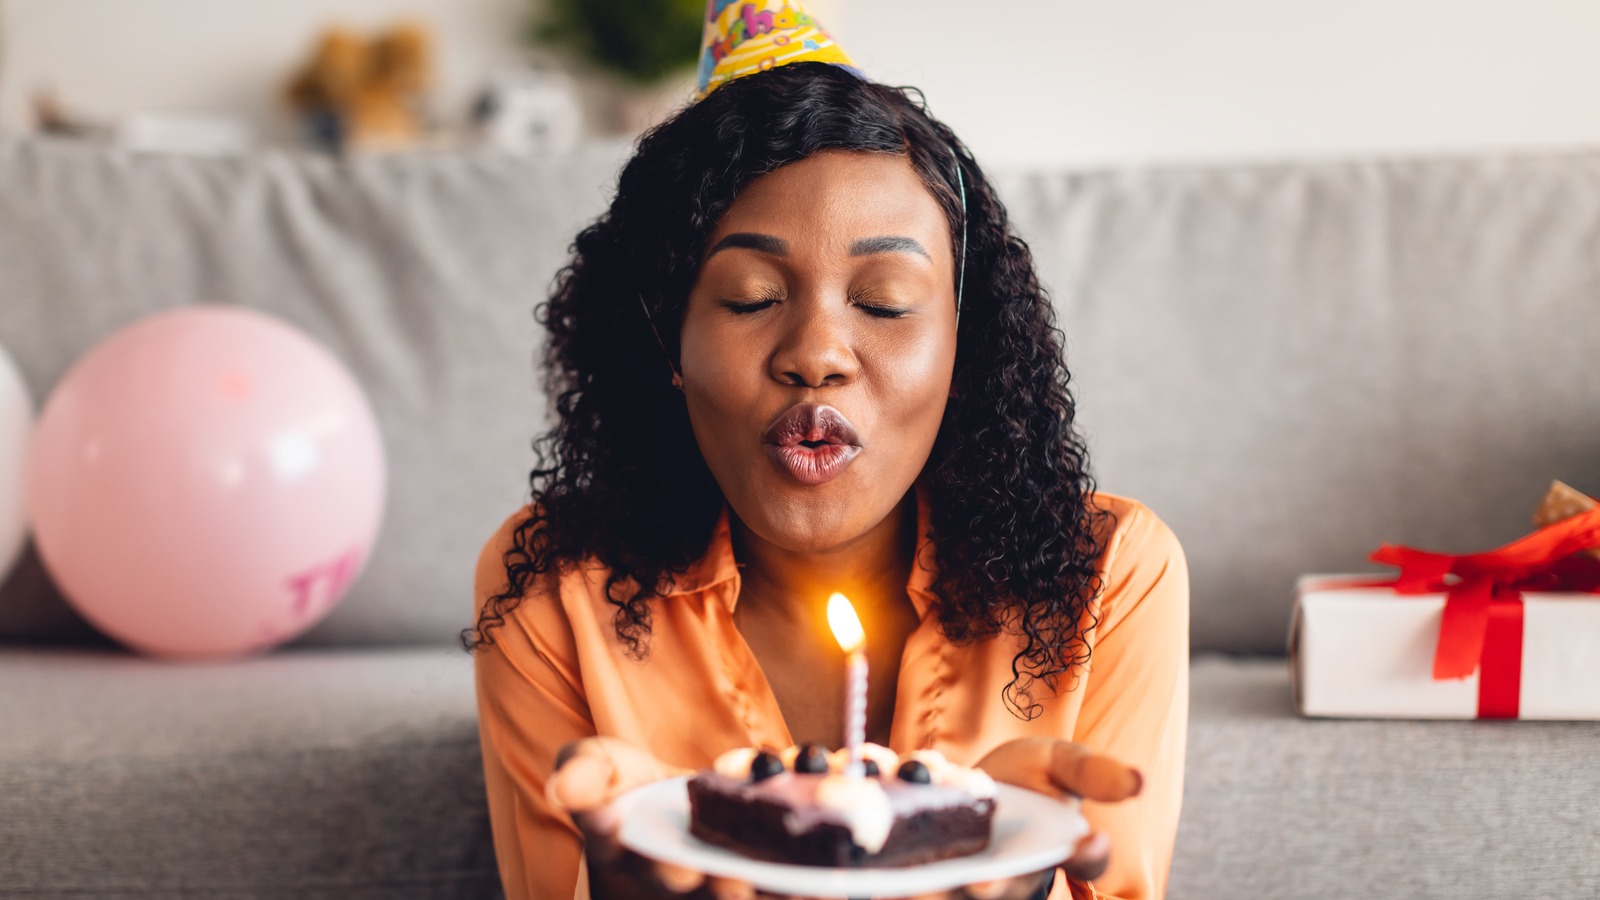 Your Guide To Getting Every Last Freebie On Your Birthday